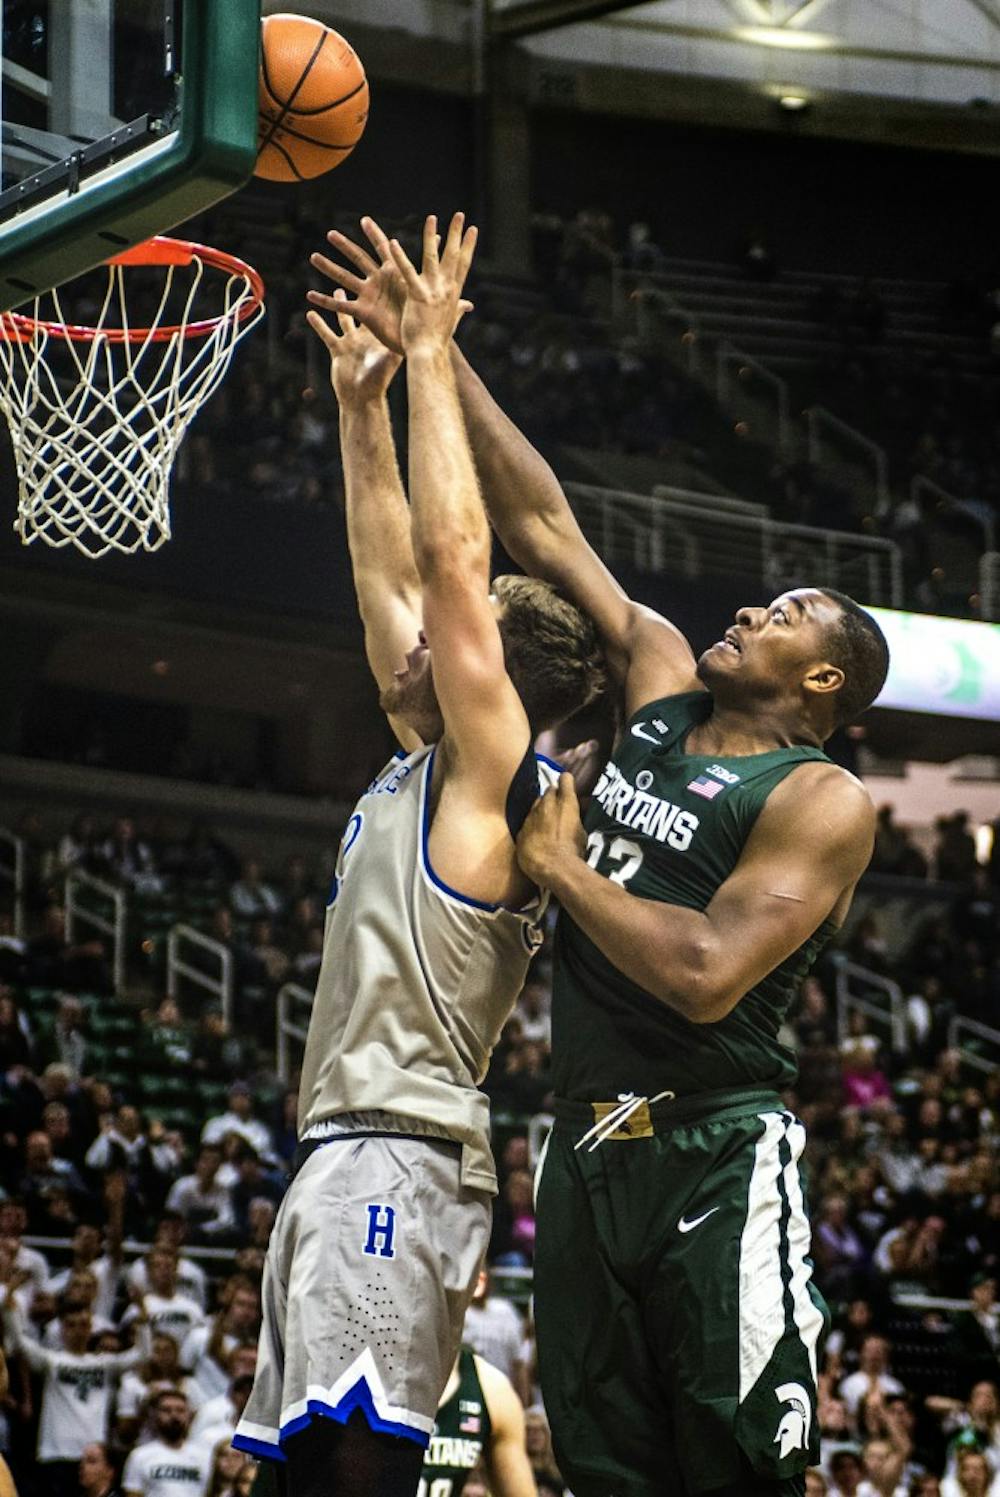 Sophomore forward Nick Ward attempts to black Hillsdale forward Trenton Richardson (32) during the game against Hillsdale on Nov. 3, 2017 at the Breslin Center.The Spartans defeated the Chargers, 75-44.